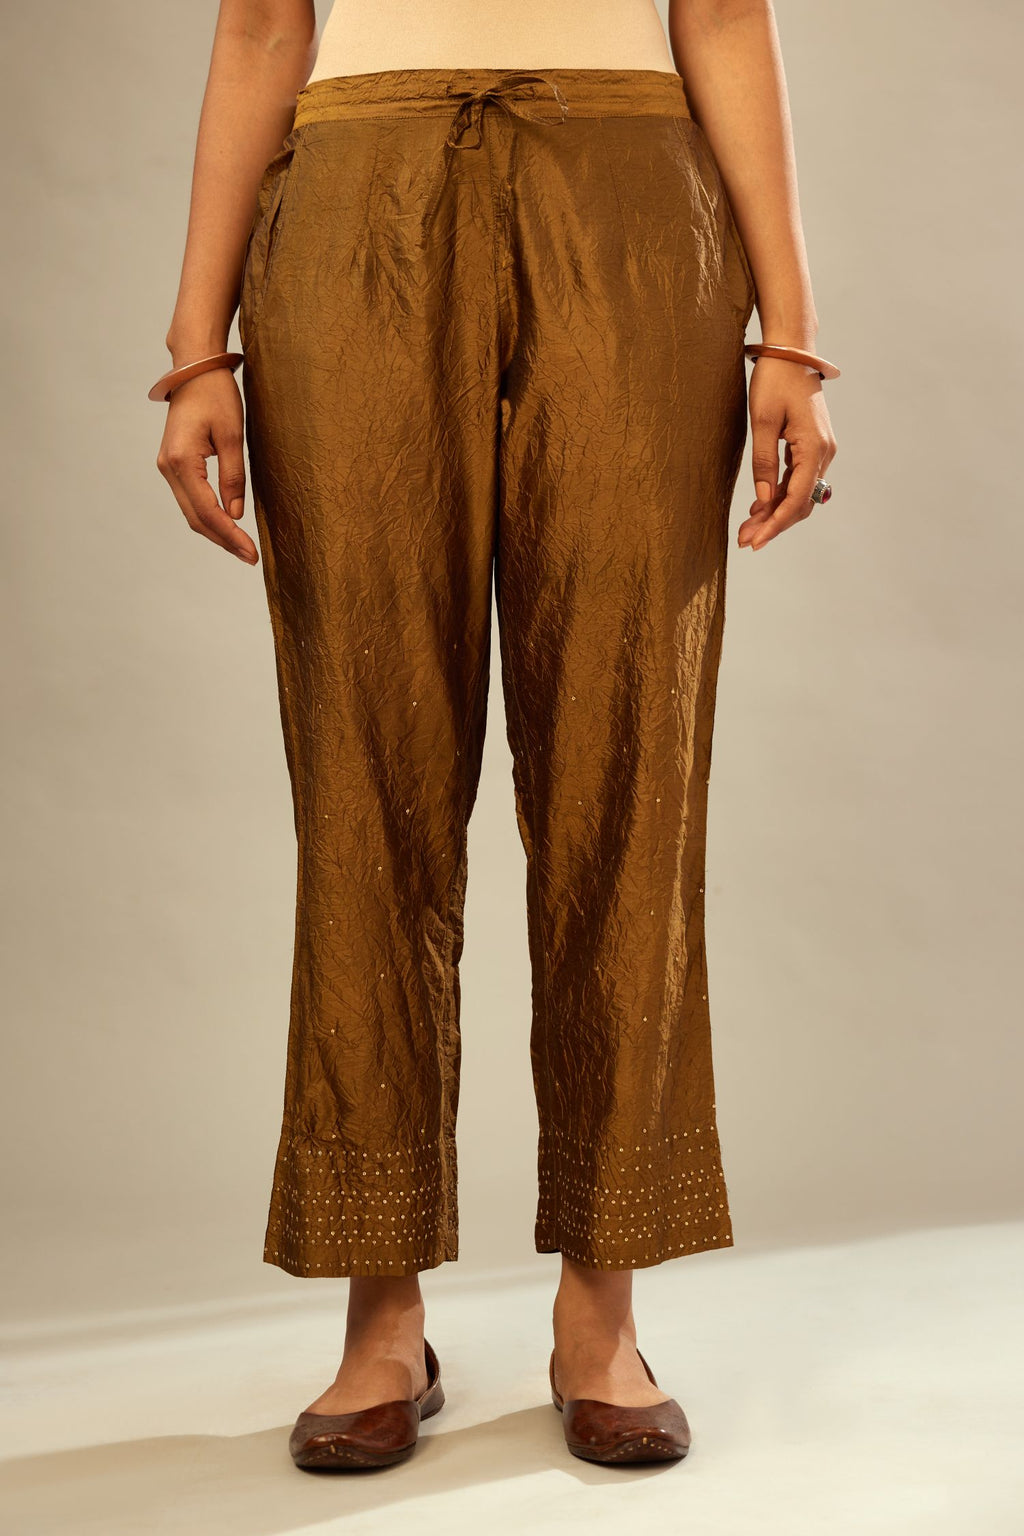 Golden olive hand crushed pure silk straight pants with gold sequins at hem in horizontal lines formation and side pockets.